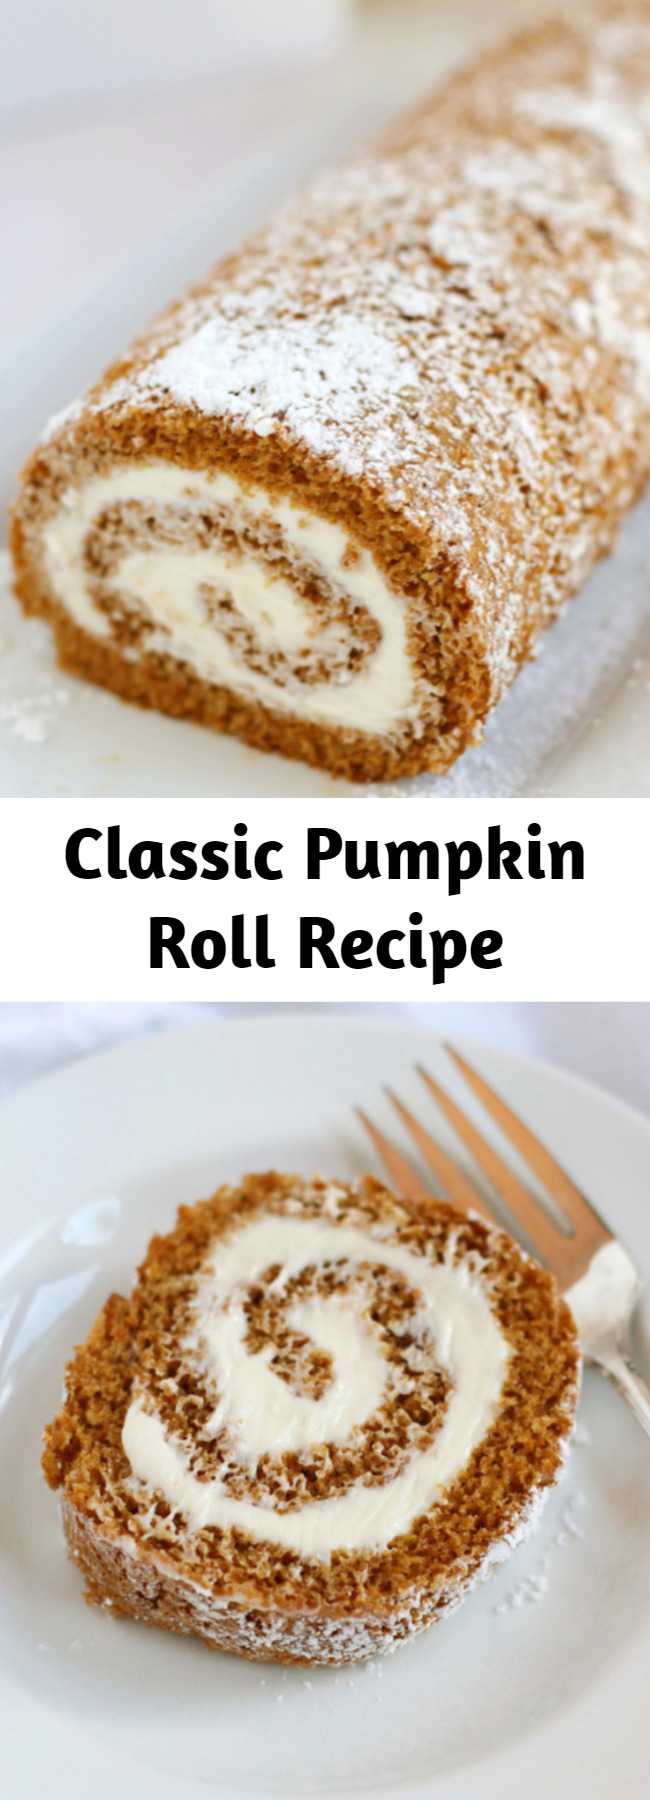 Classic Pumpkin Roll Recipe - Cinnamon and cloves add the spice to this pumpkin sheet cake, topped with cream cheese frosting and rolled into a festive log.